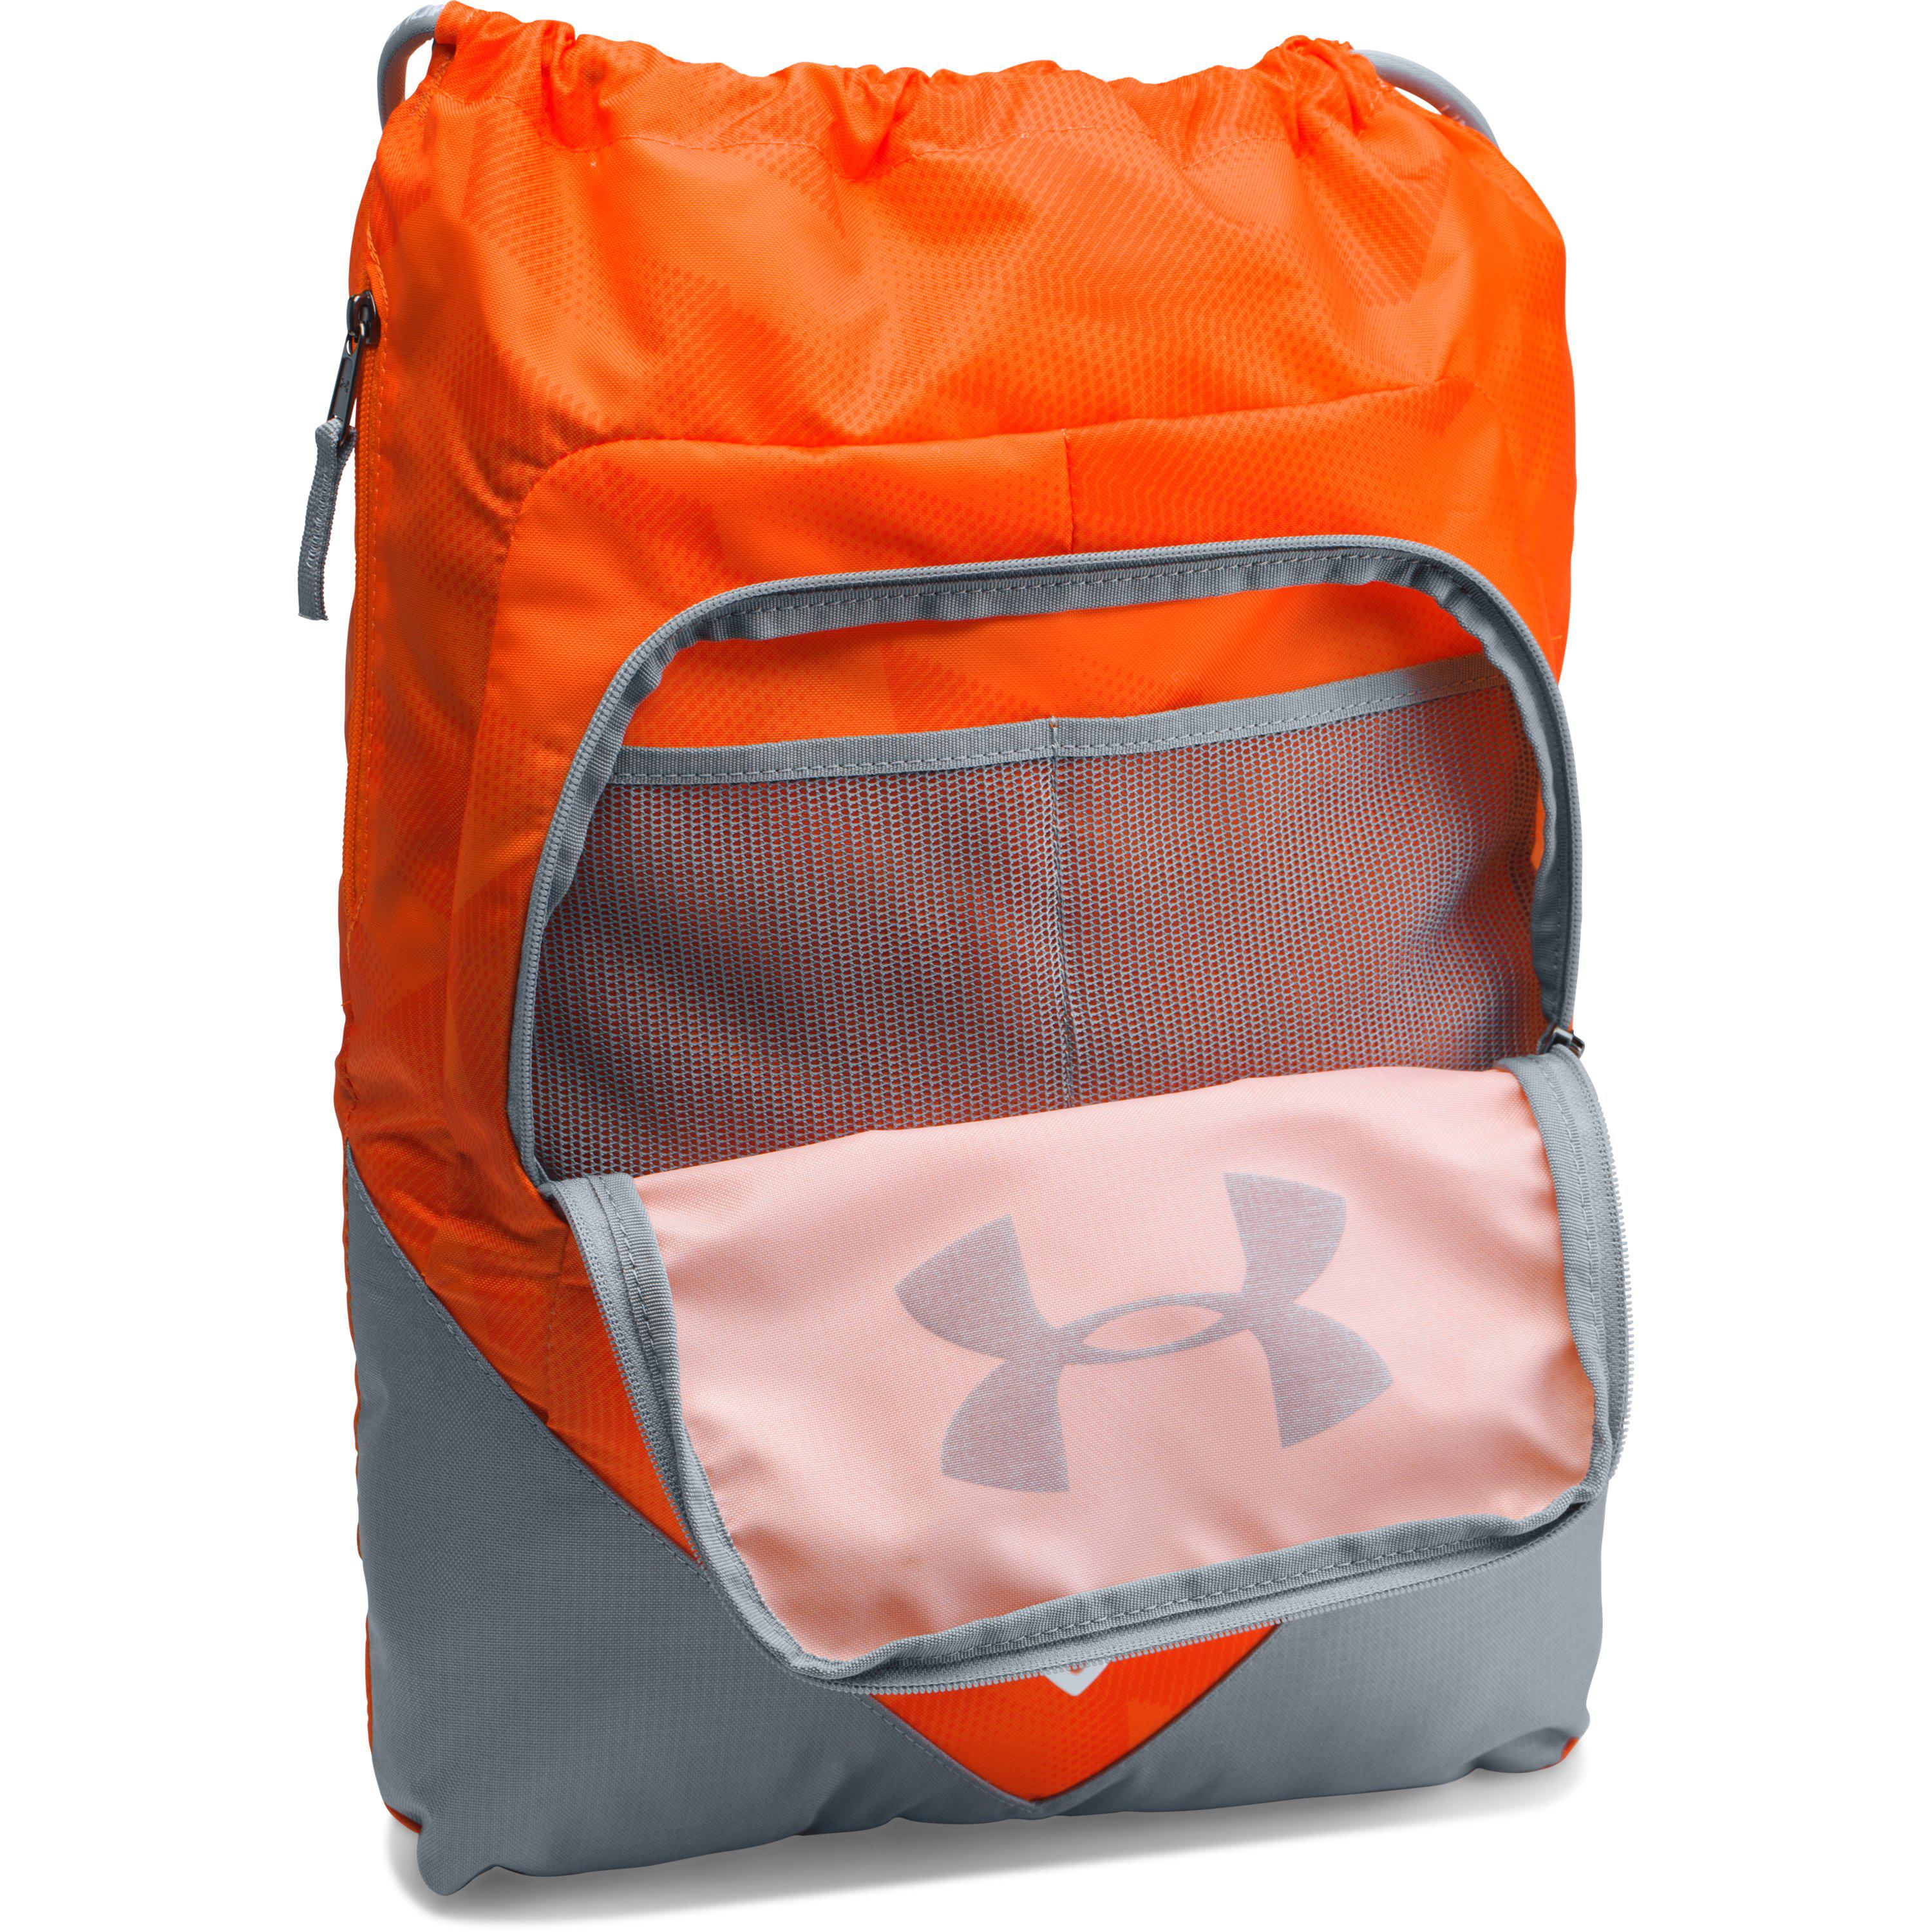 Under Armour Ua Undeniable Sackpack in Orange - Lyst